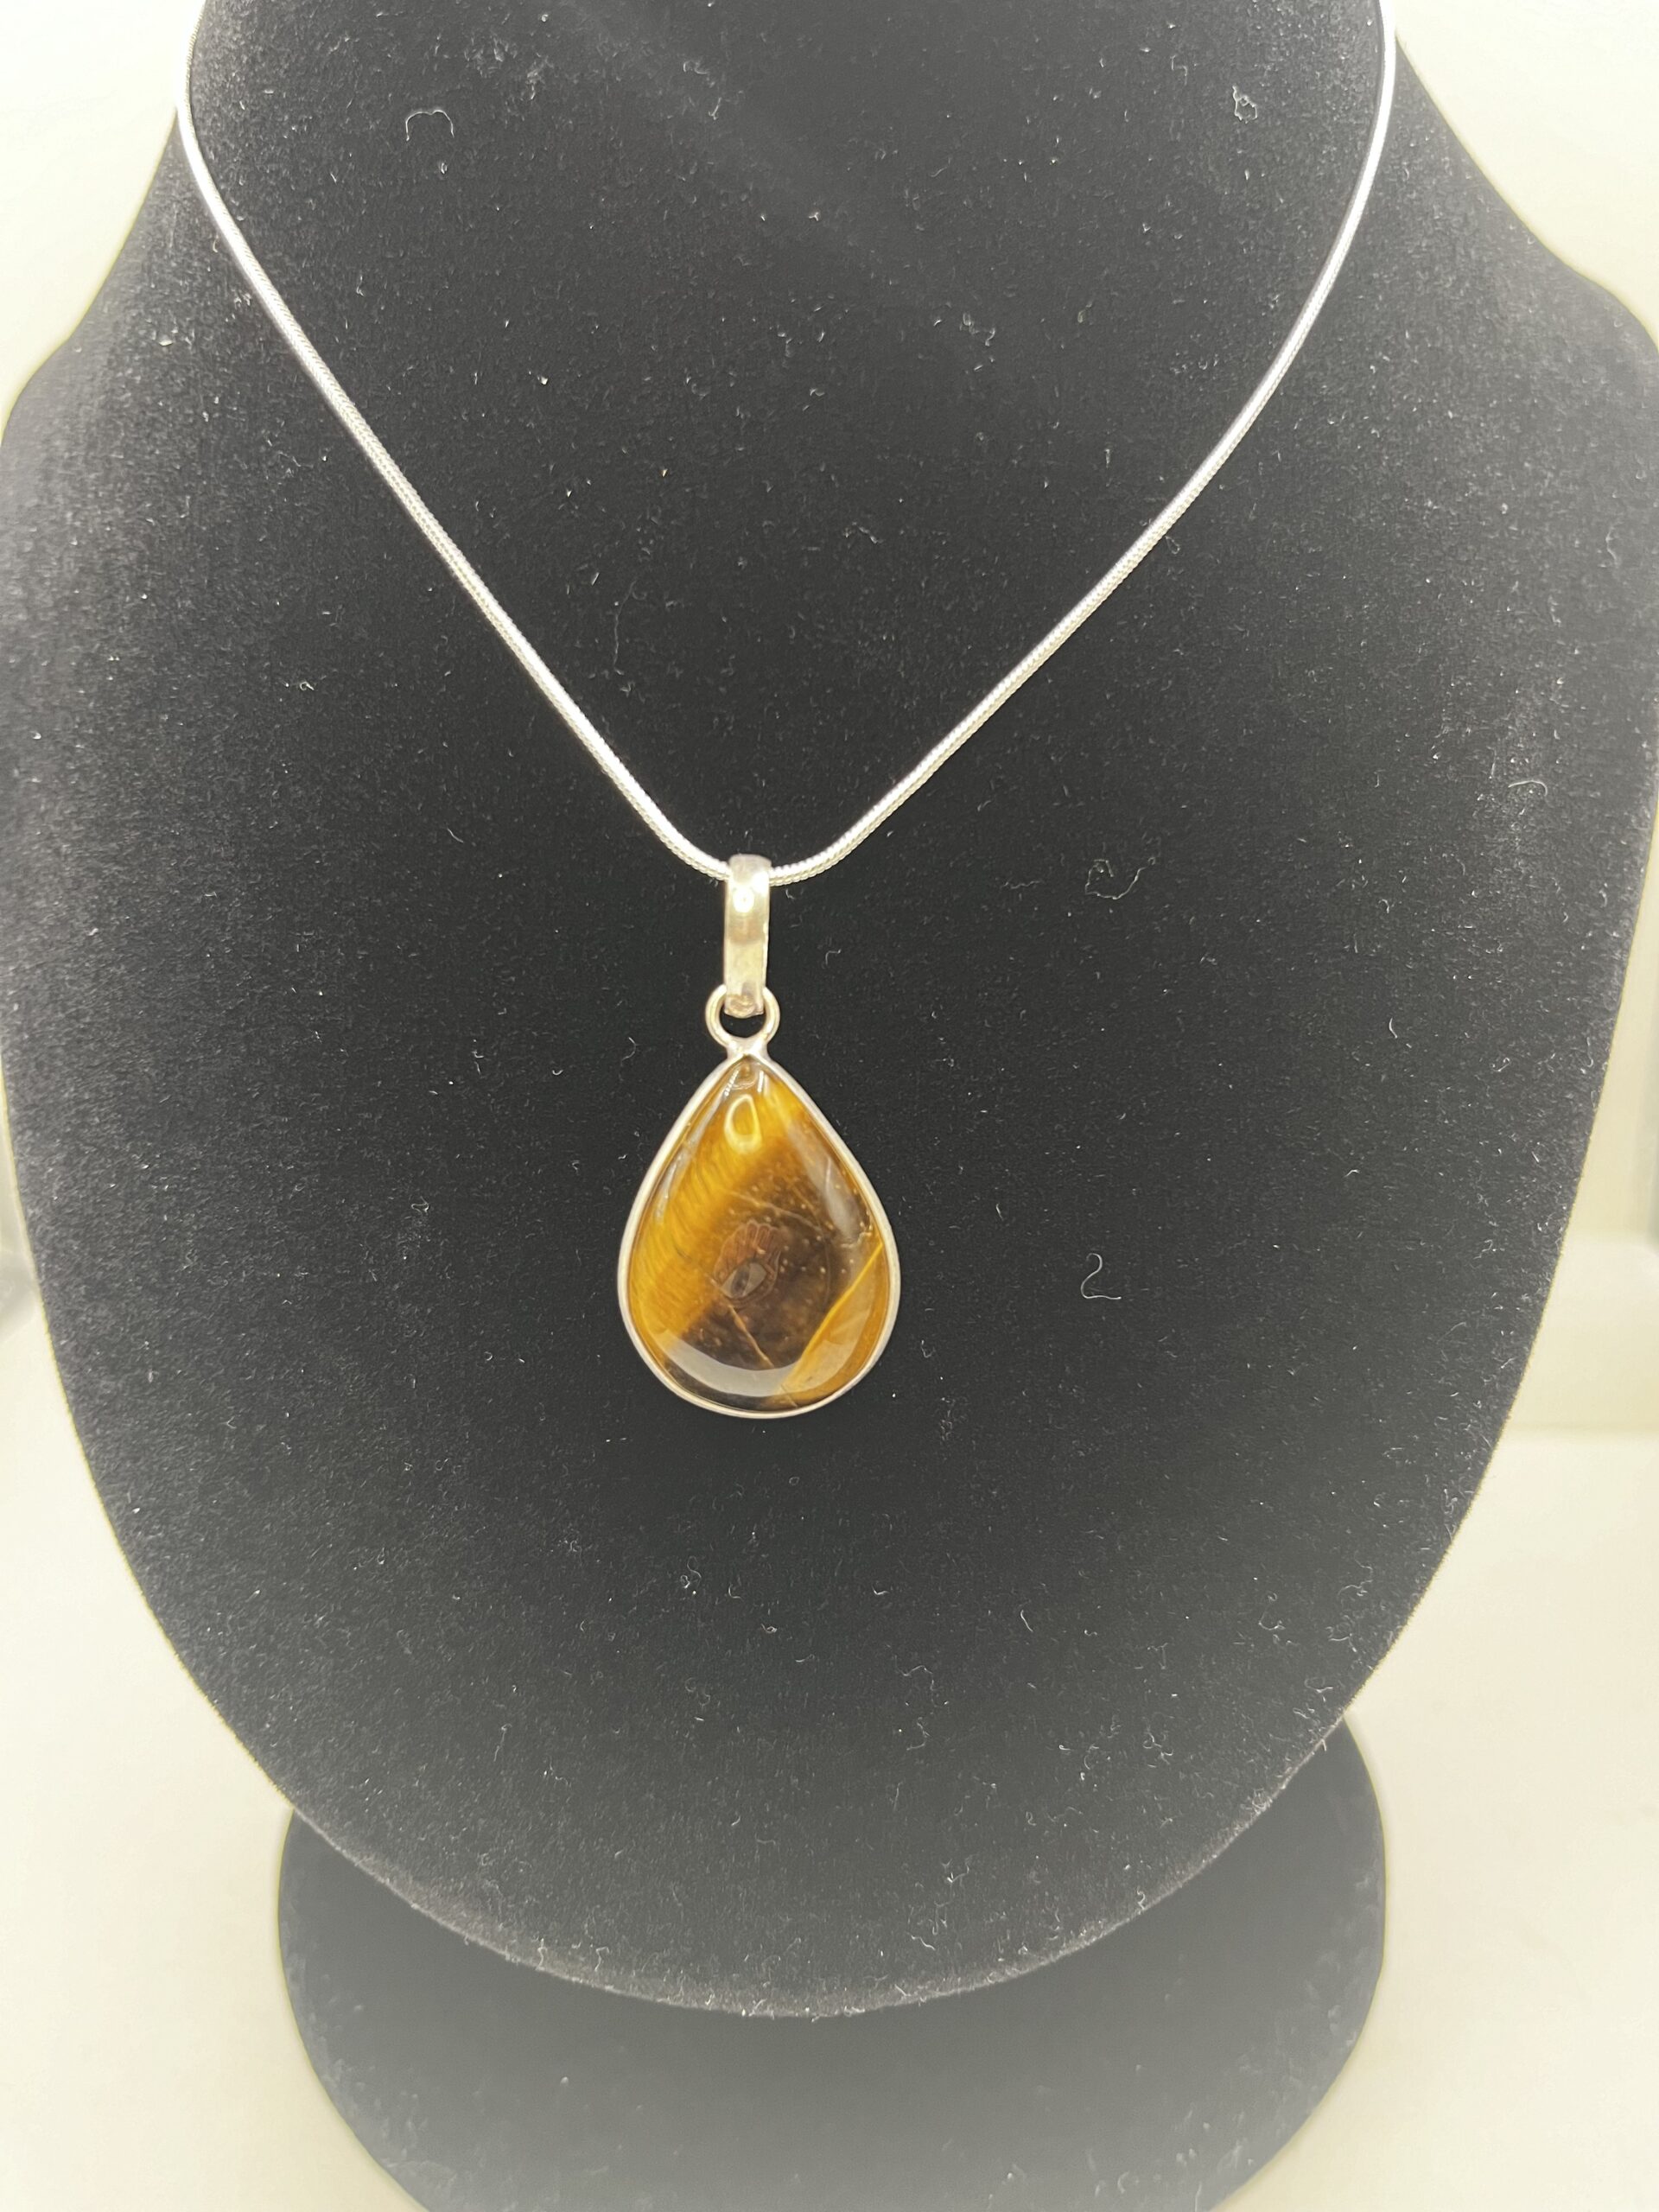 A necklace with a tiger eye stone on it